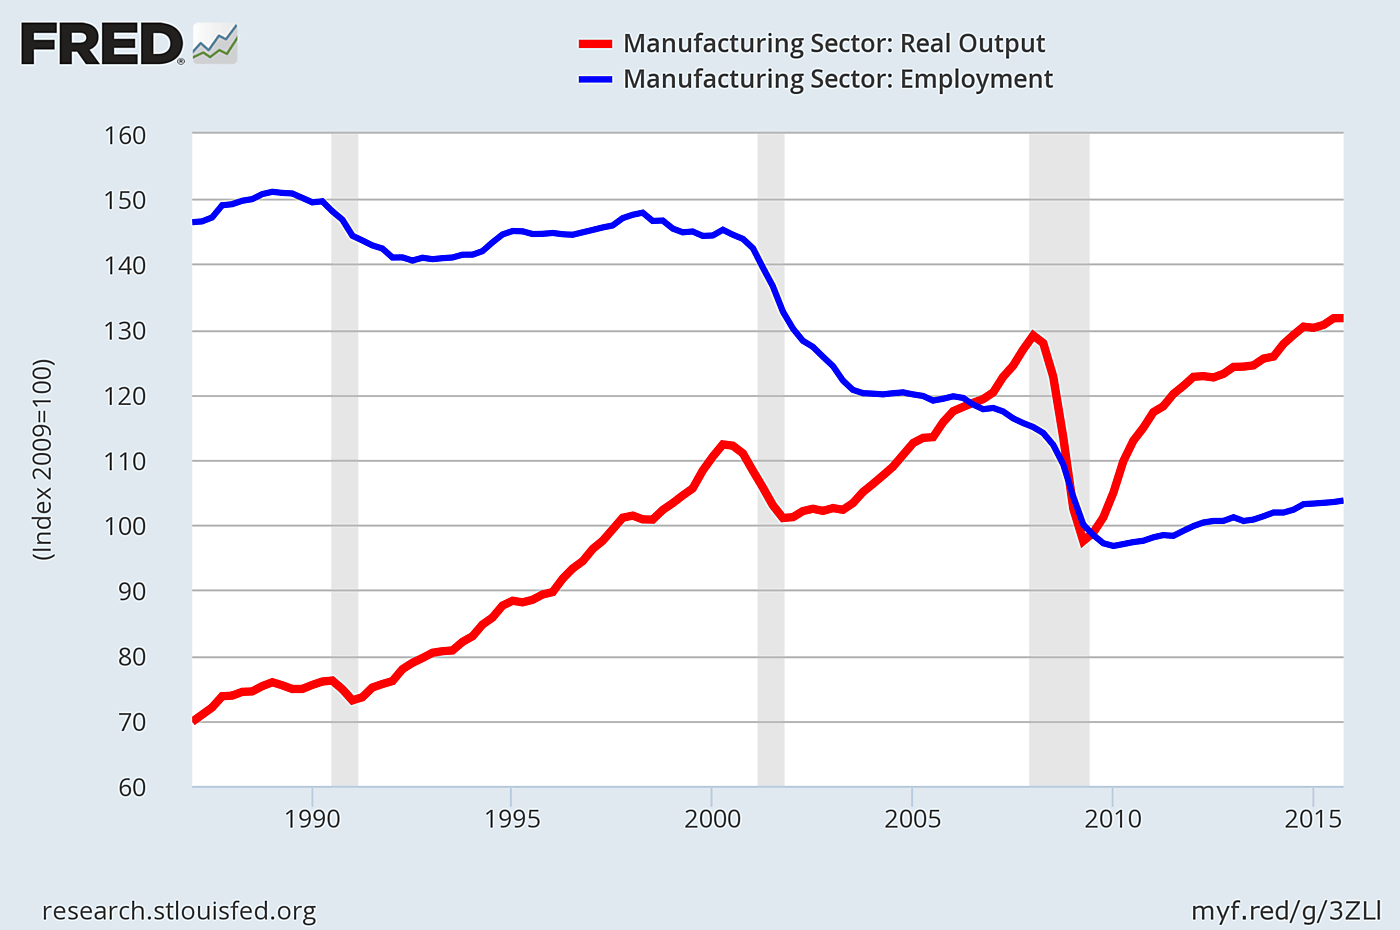 Index of U.S. Manufacturing Output and Employment